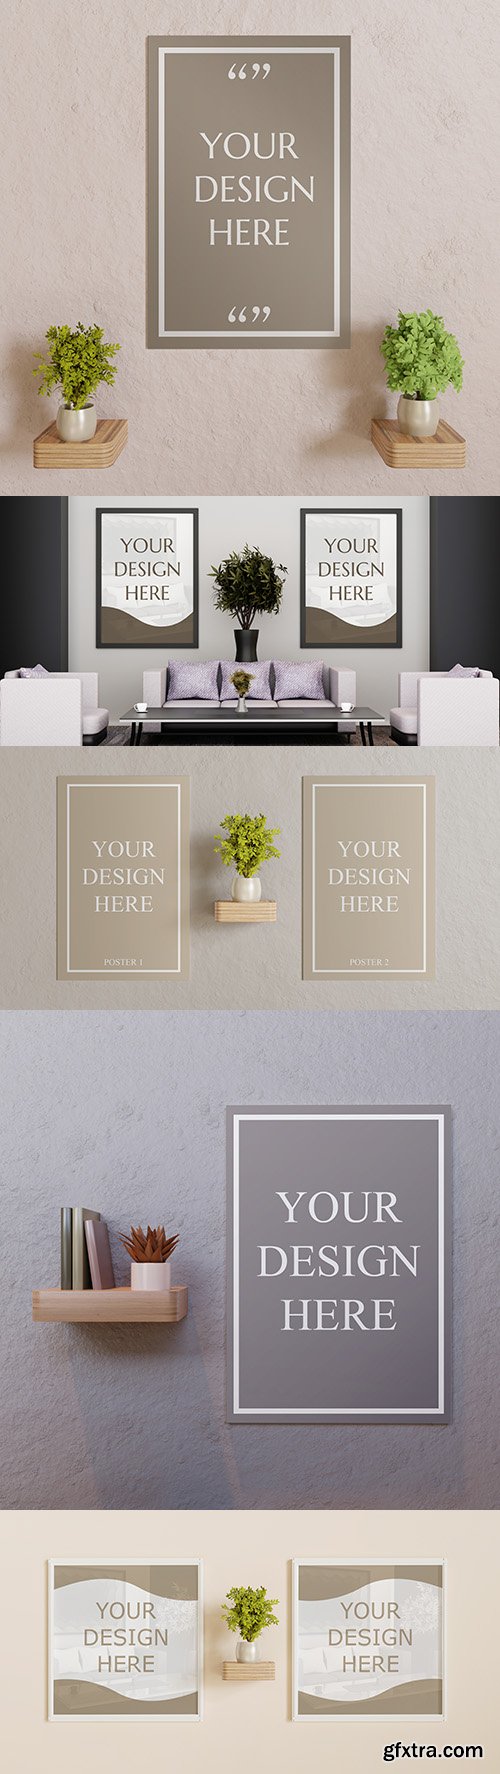 Square white frame on wall with plant decoration template